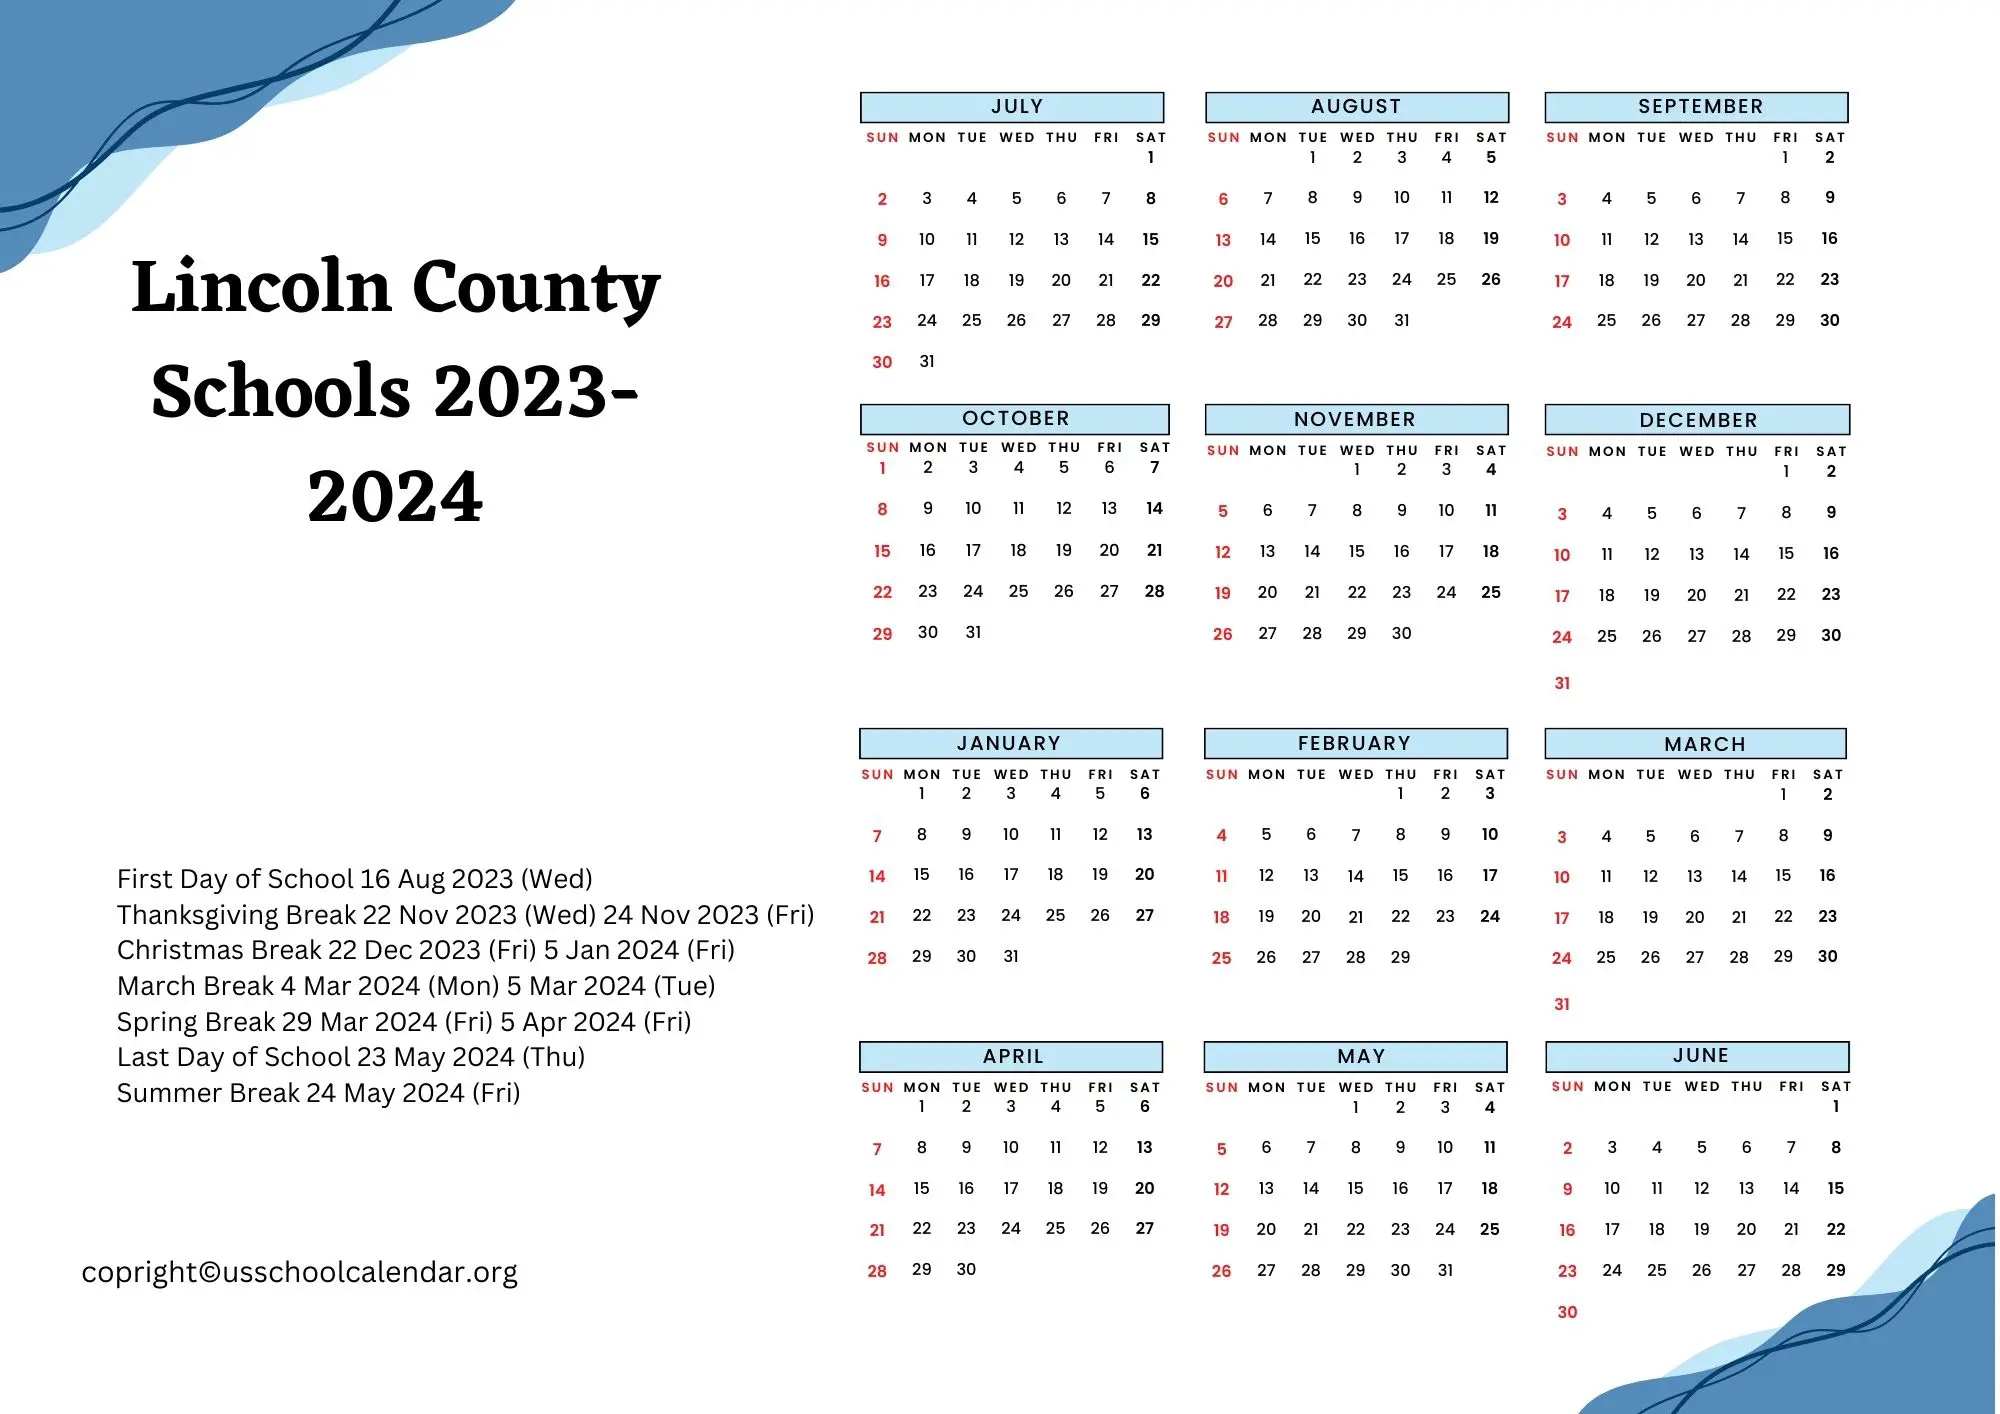 Lincoln County Schools Calendar with Holidays 2023-2024